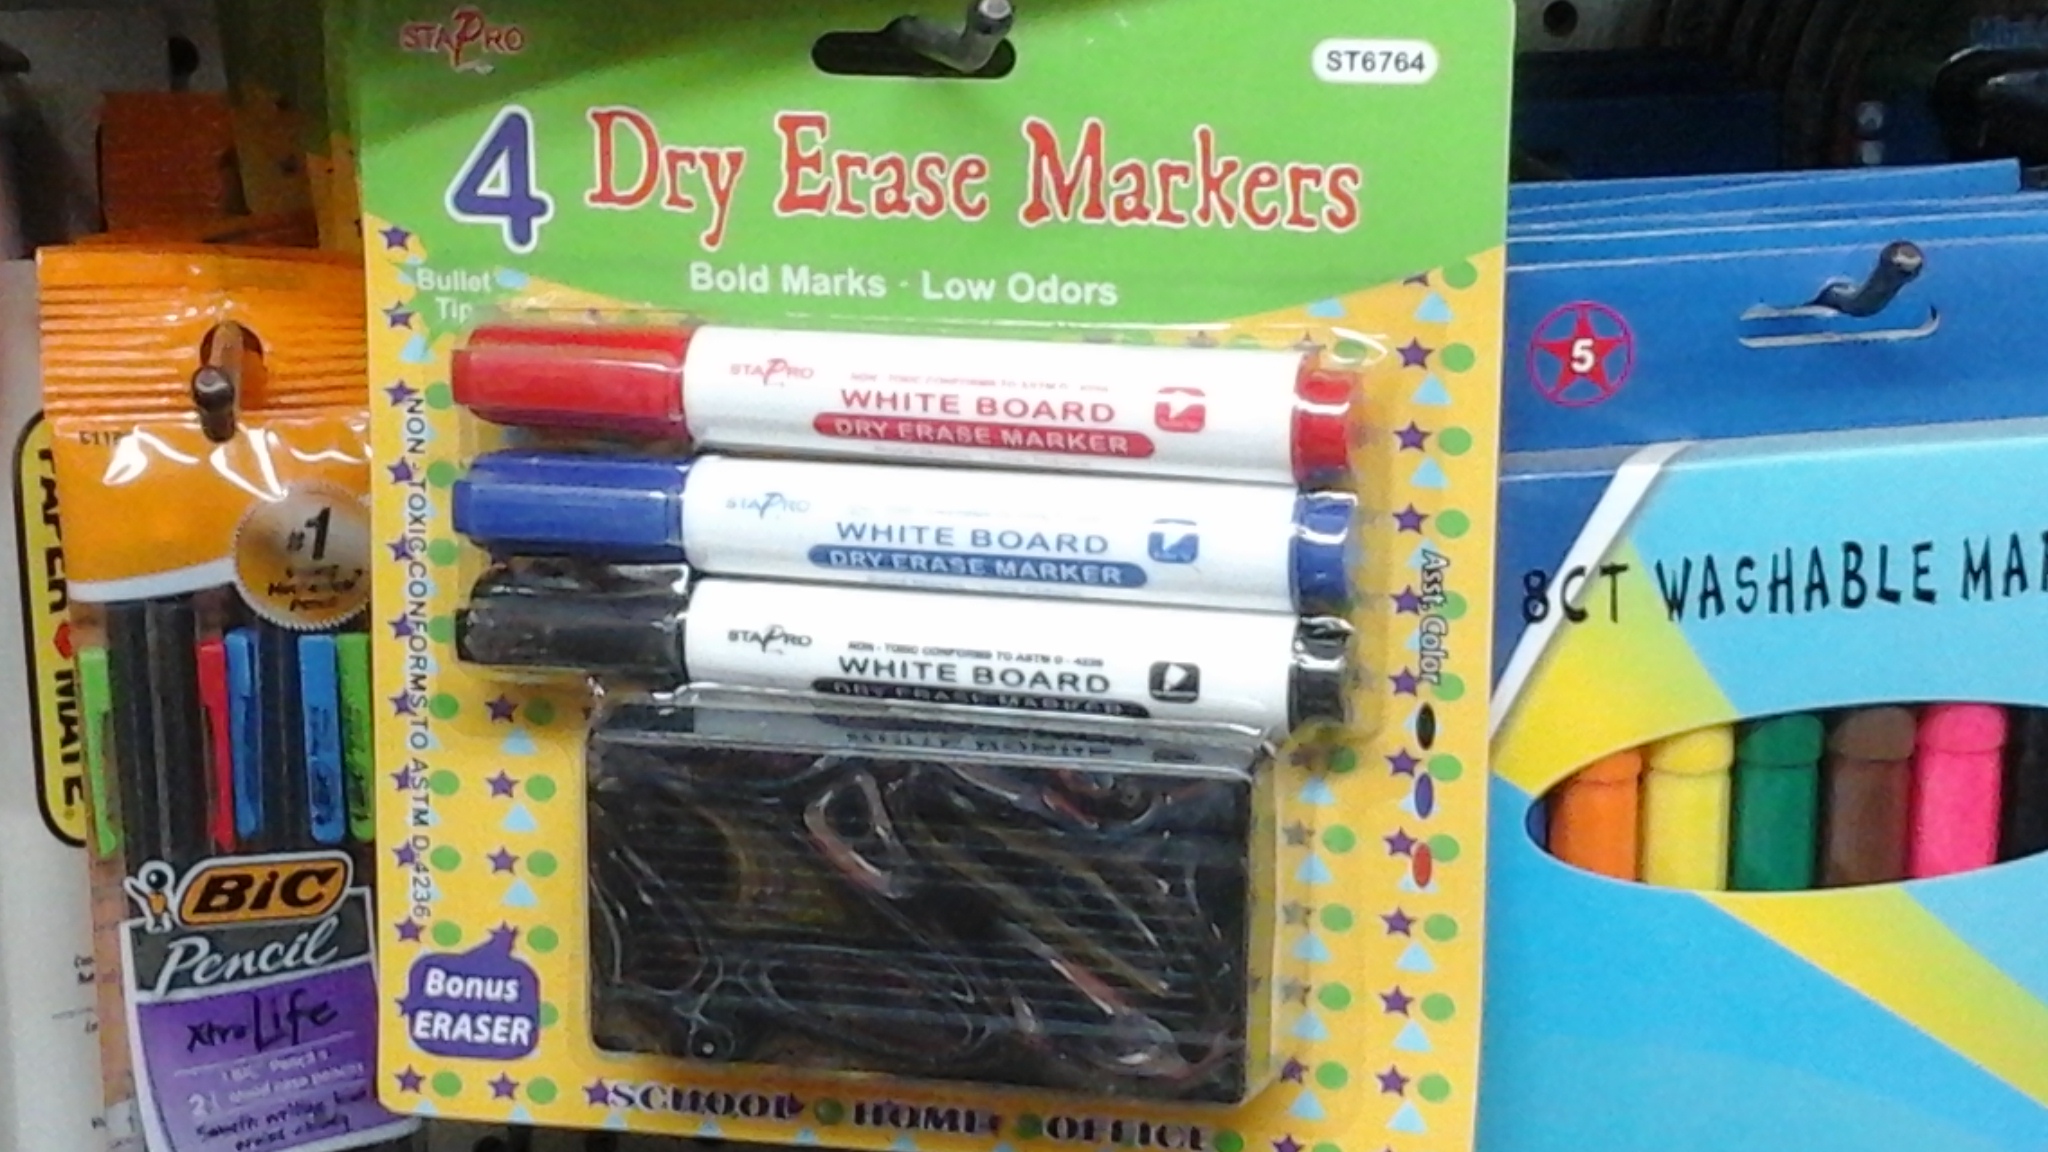 This pack has the wrong amount of markers in it.